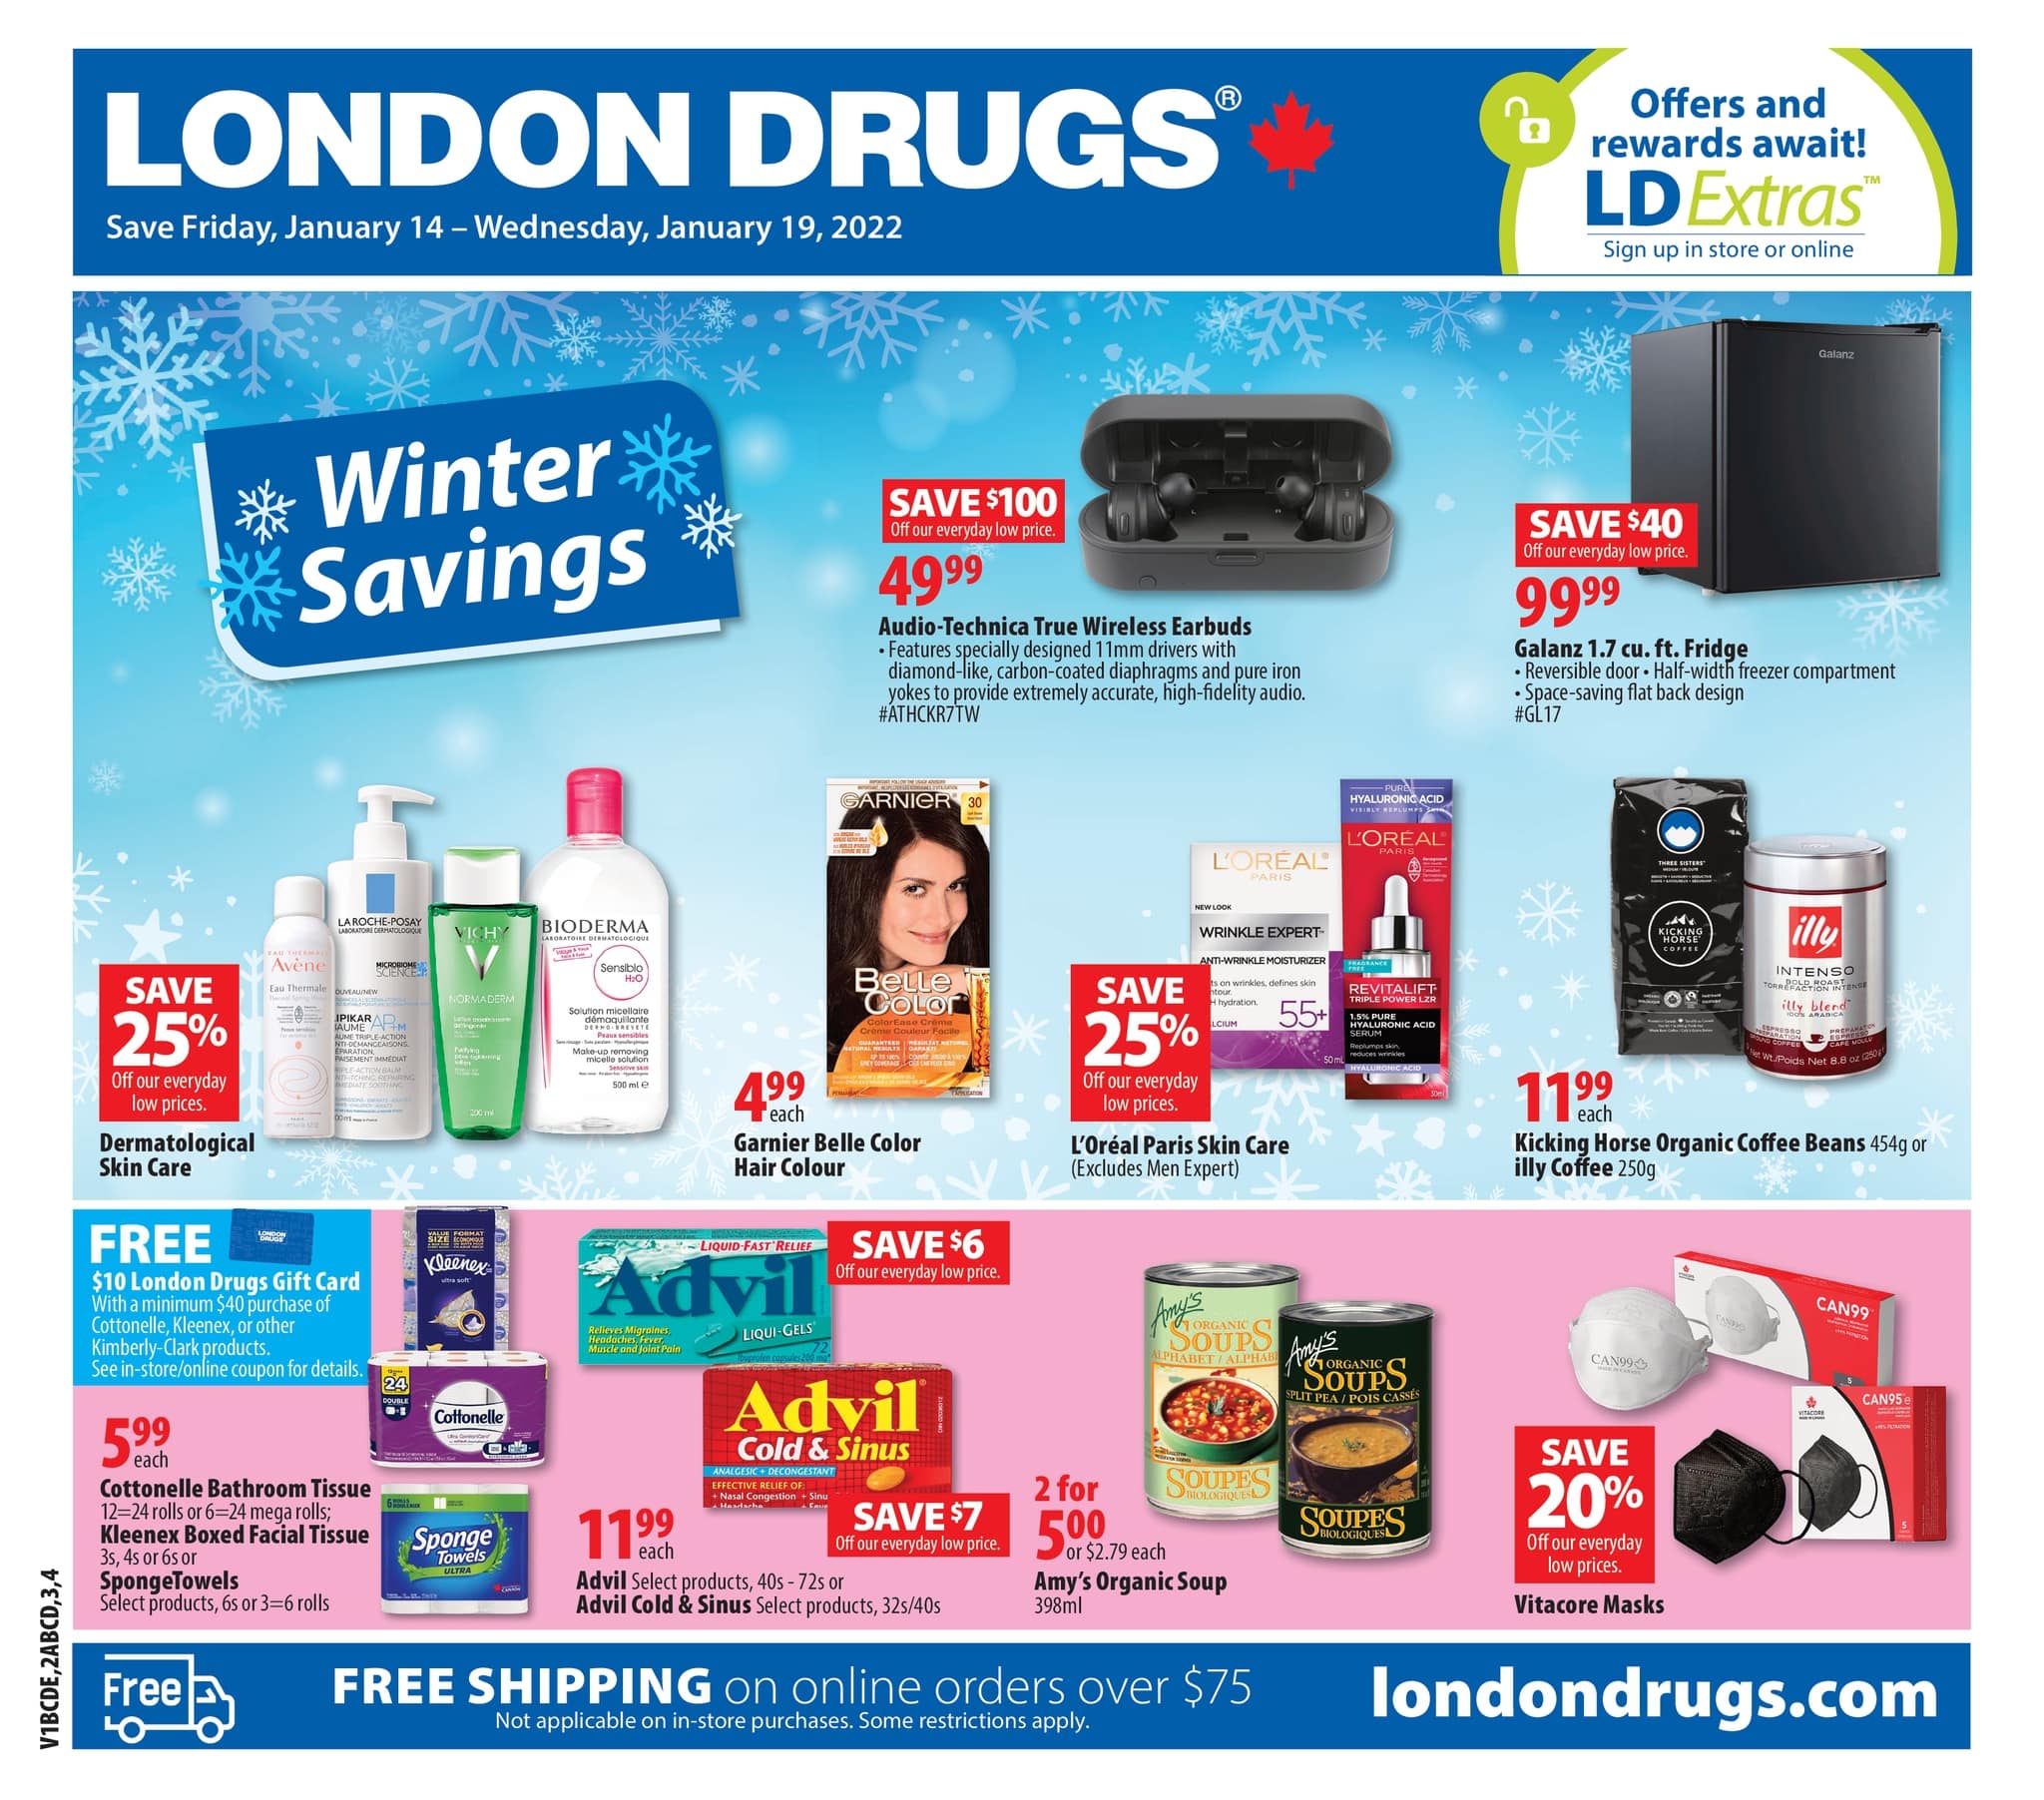 London Drugs - Weekly Flyer Specials